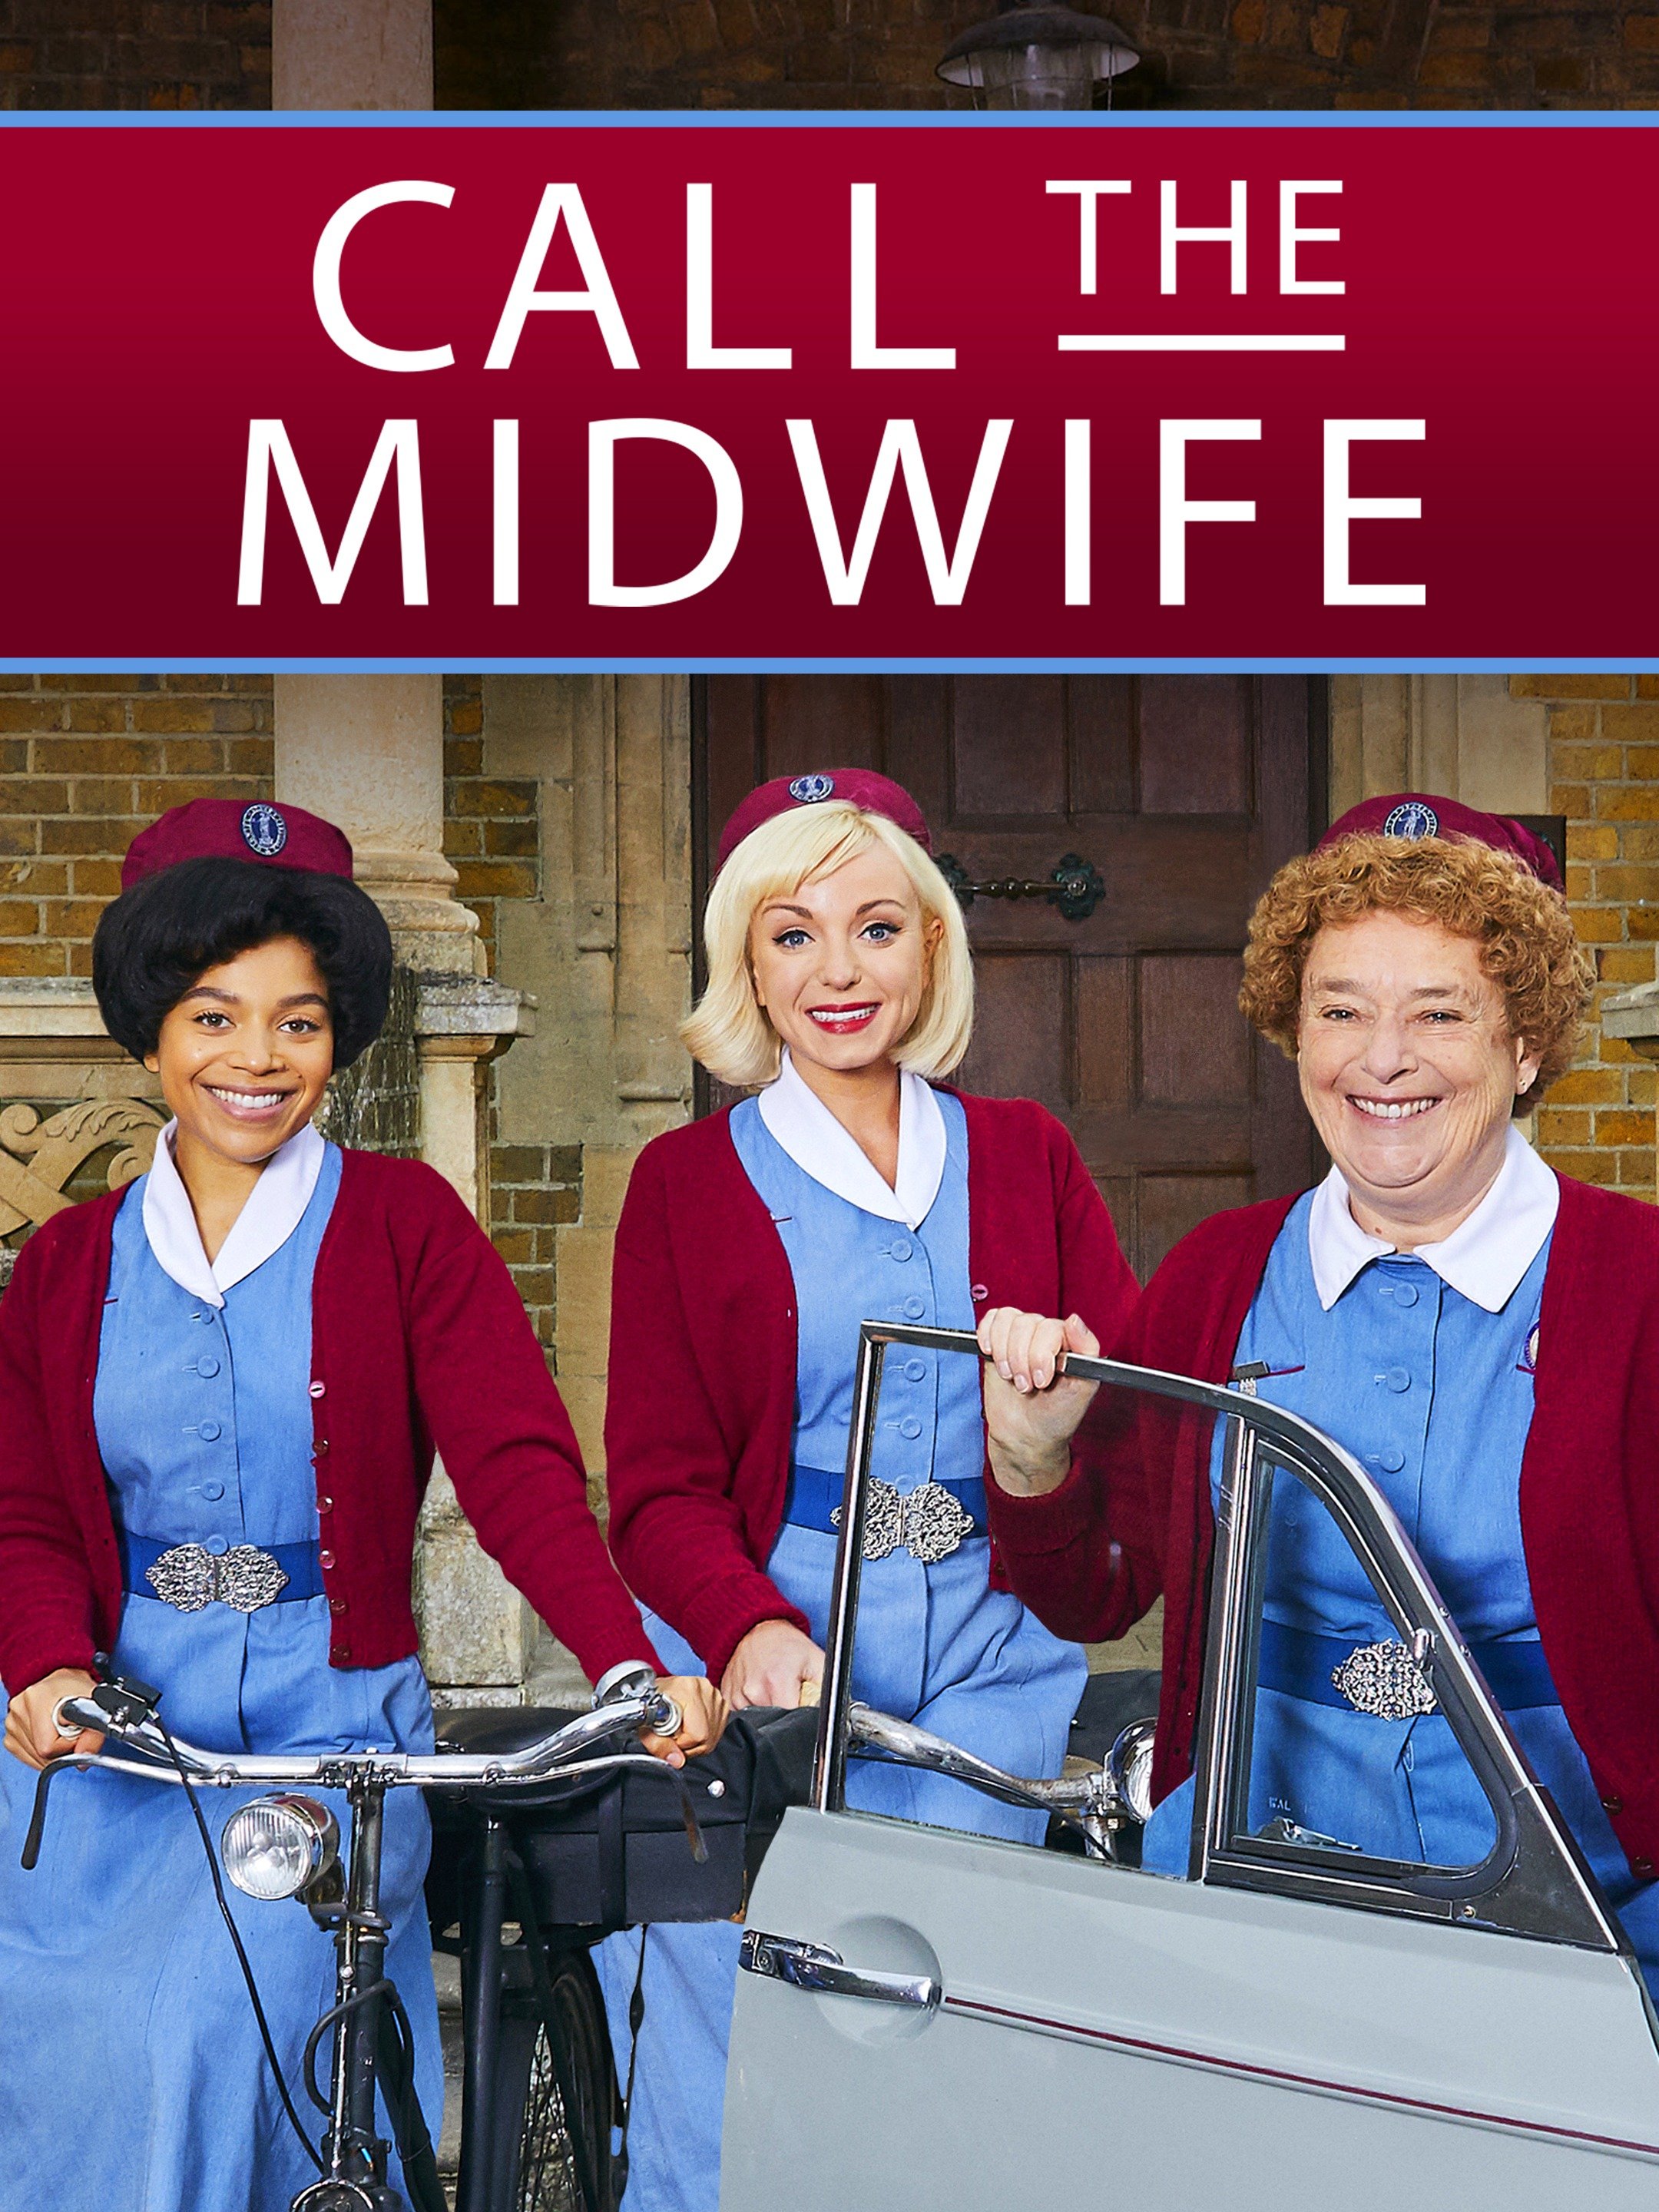 They call you "Midwife"? quote. 